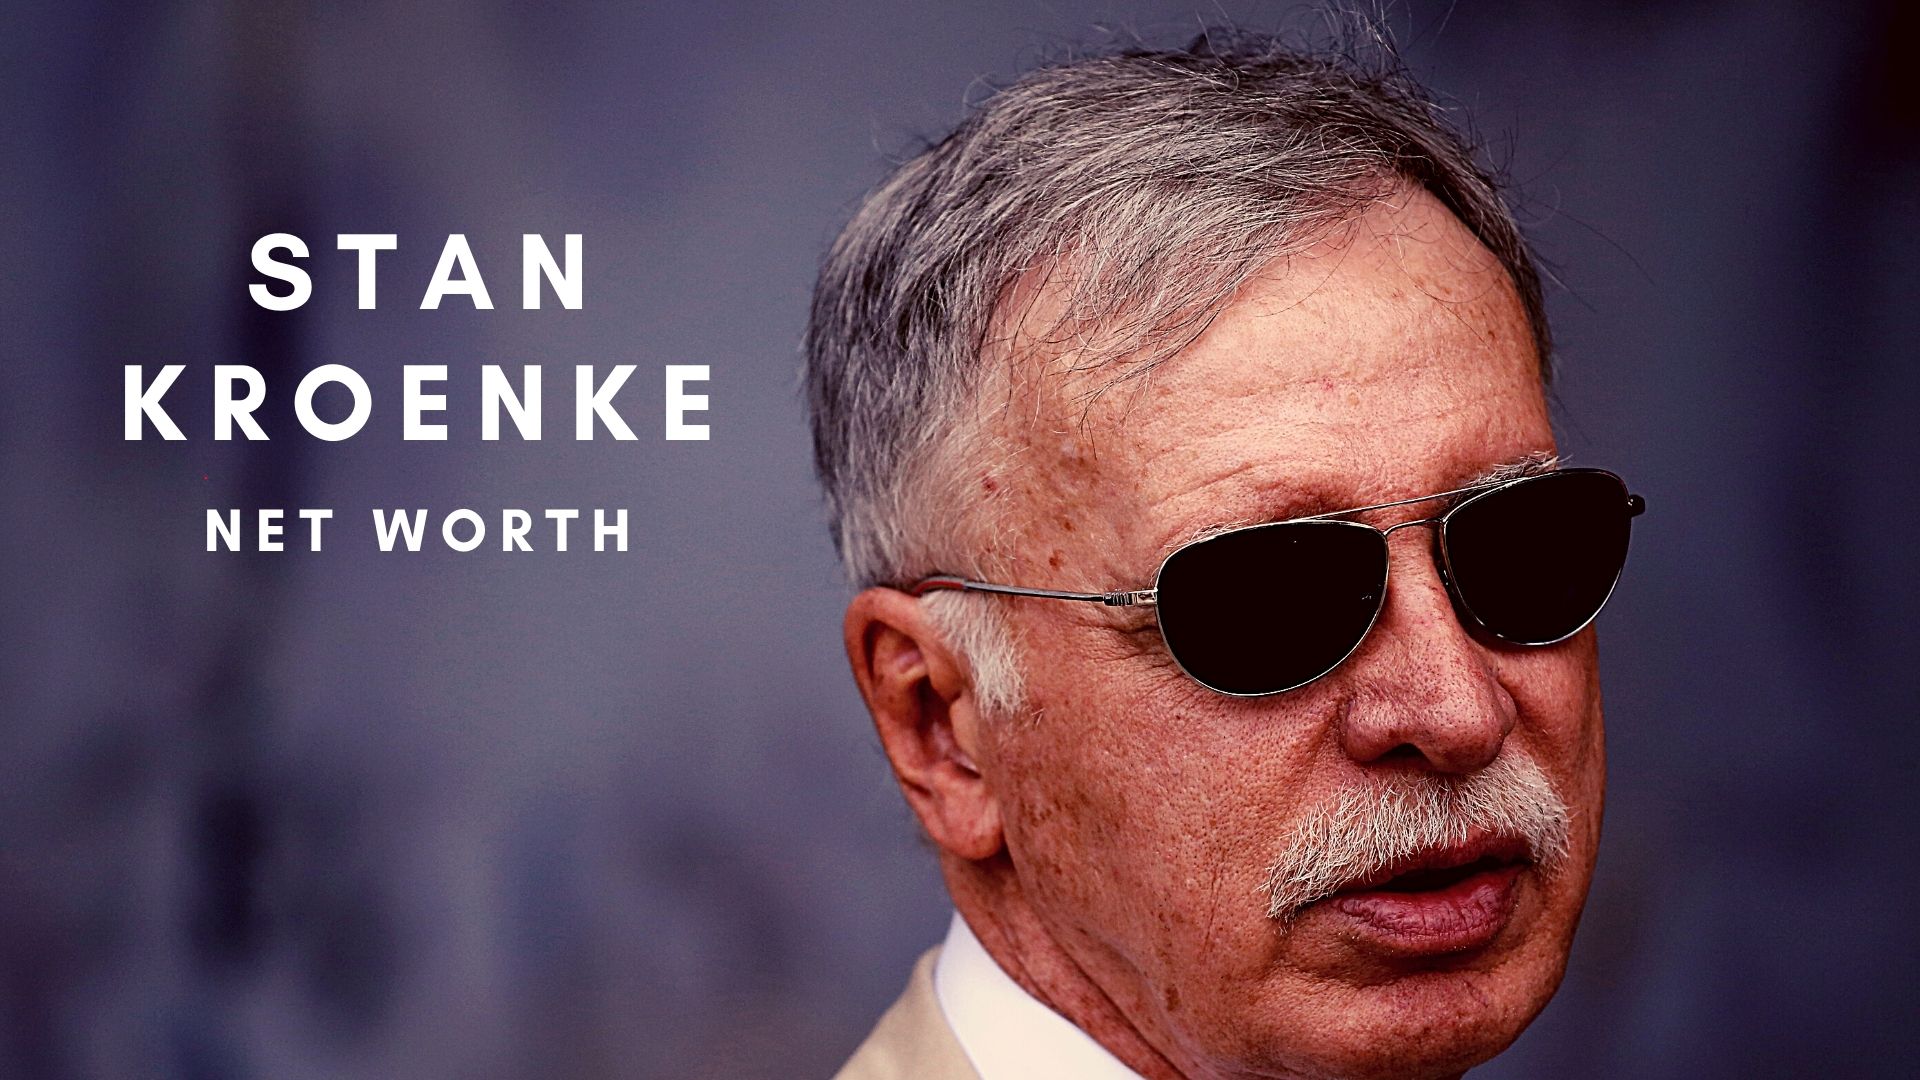 Stan Kroenke is the owner of Arsenal and has a huge net worth too